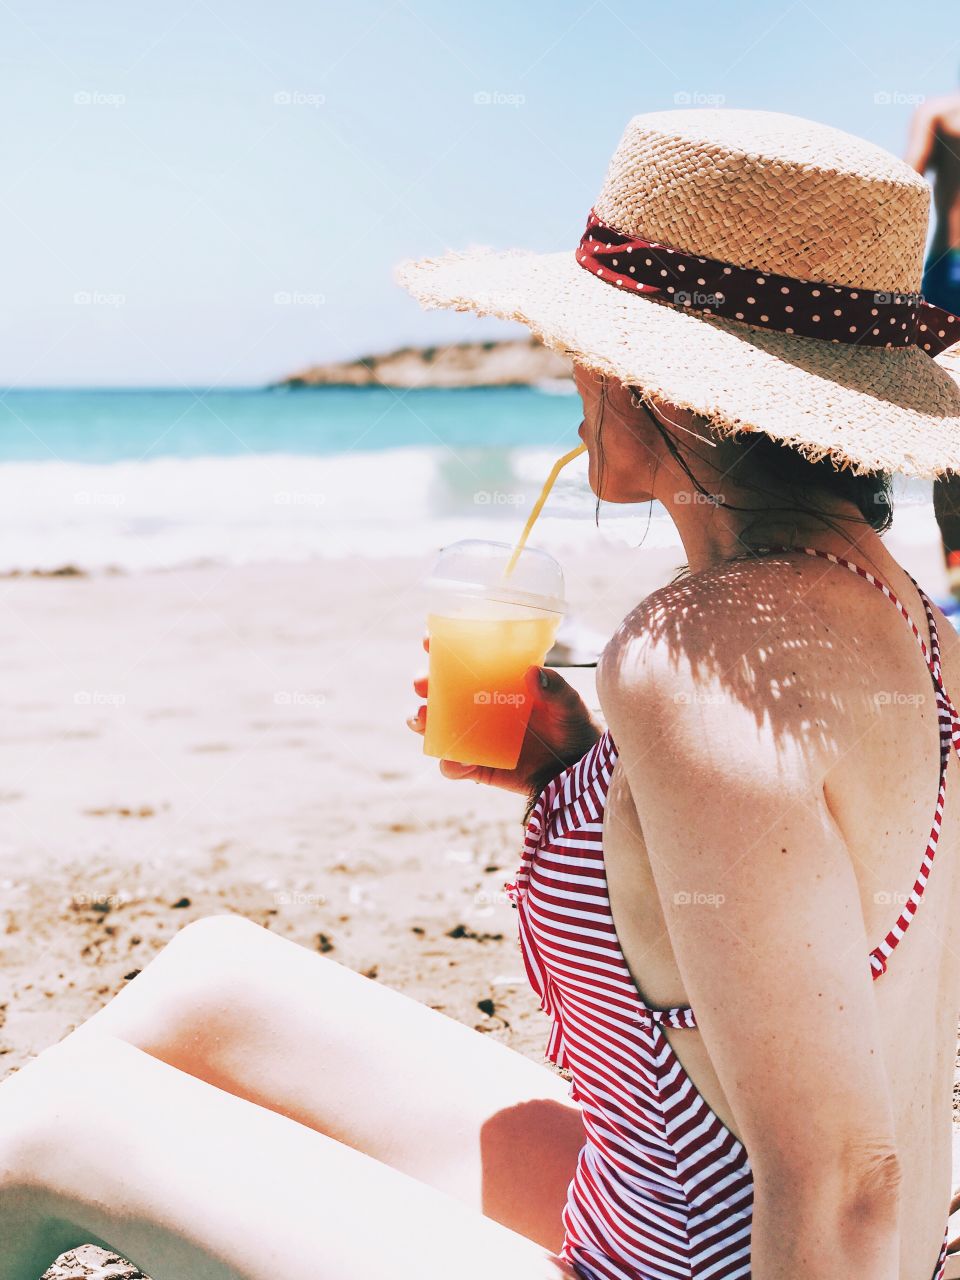 Girl in the straw hat drinking juice on the beach